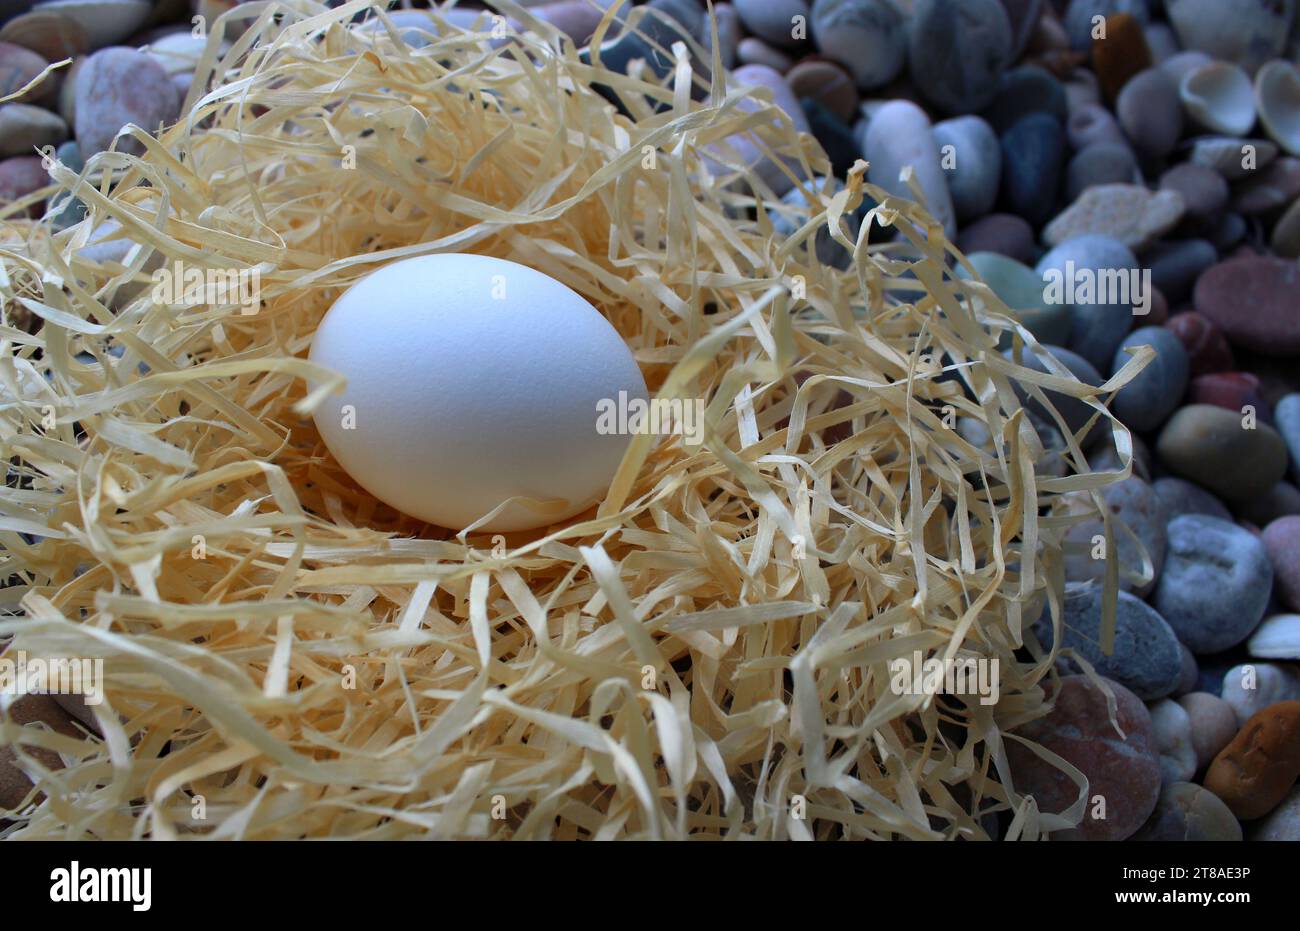 Straw Nest With Chicken Egg On A Pebbles Detailed Stock Photo Stock Photo